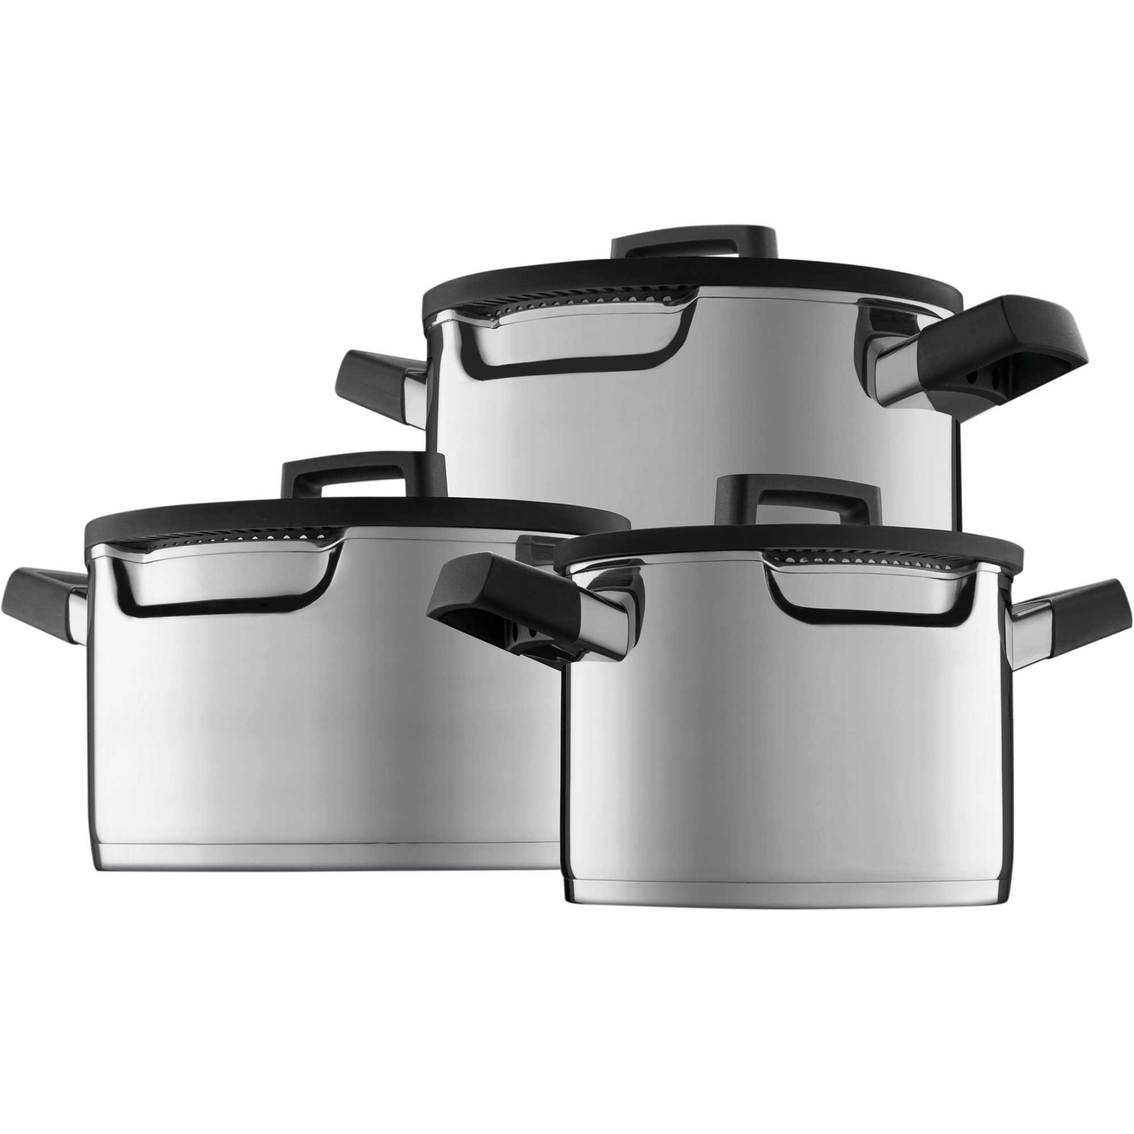 BergHOFF's Gem Downdraft 18/10 Stainless Steel 6 pc. Cookware Set - Image 2 of 7